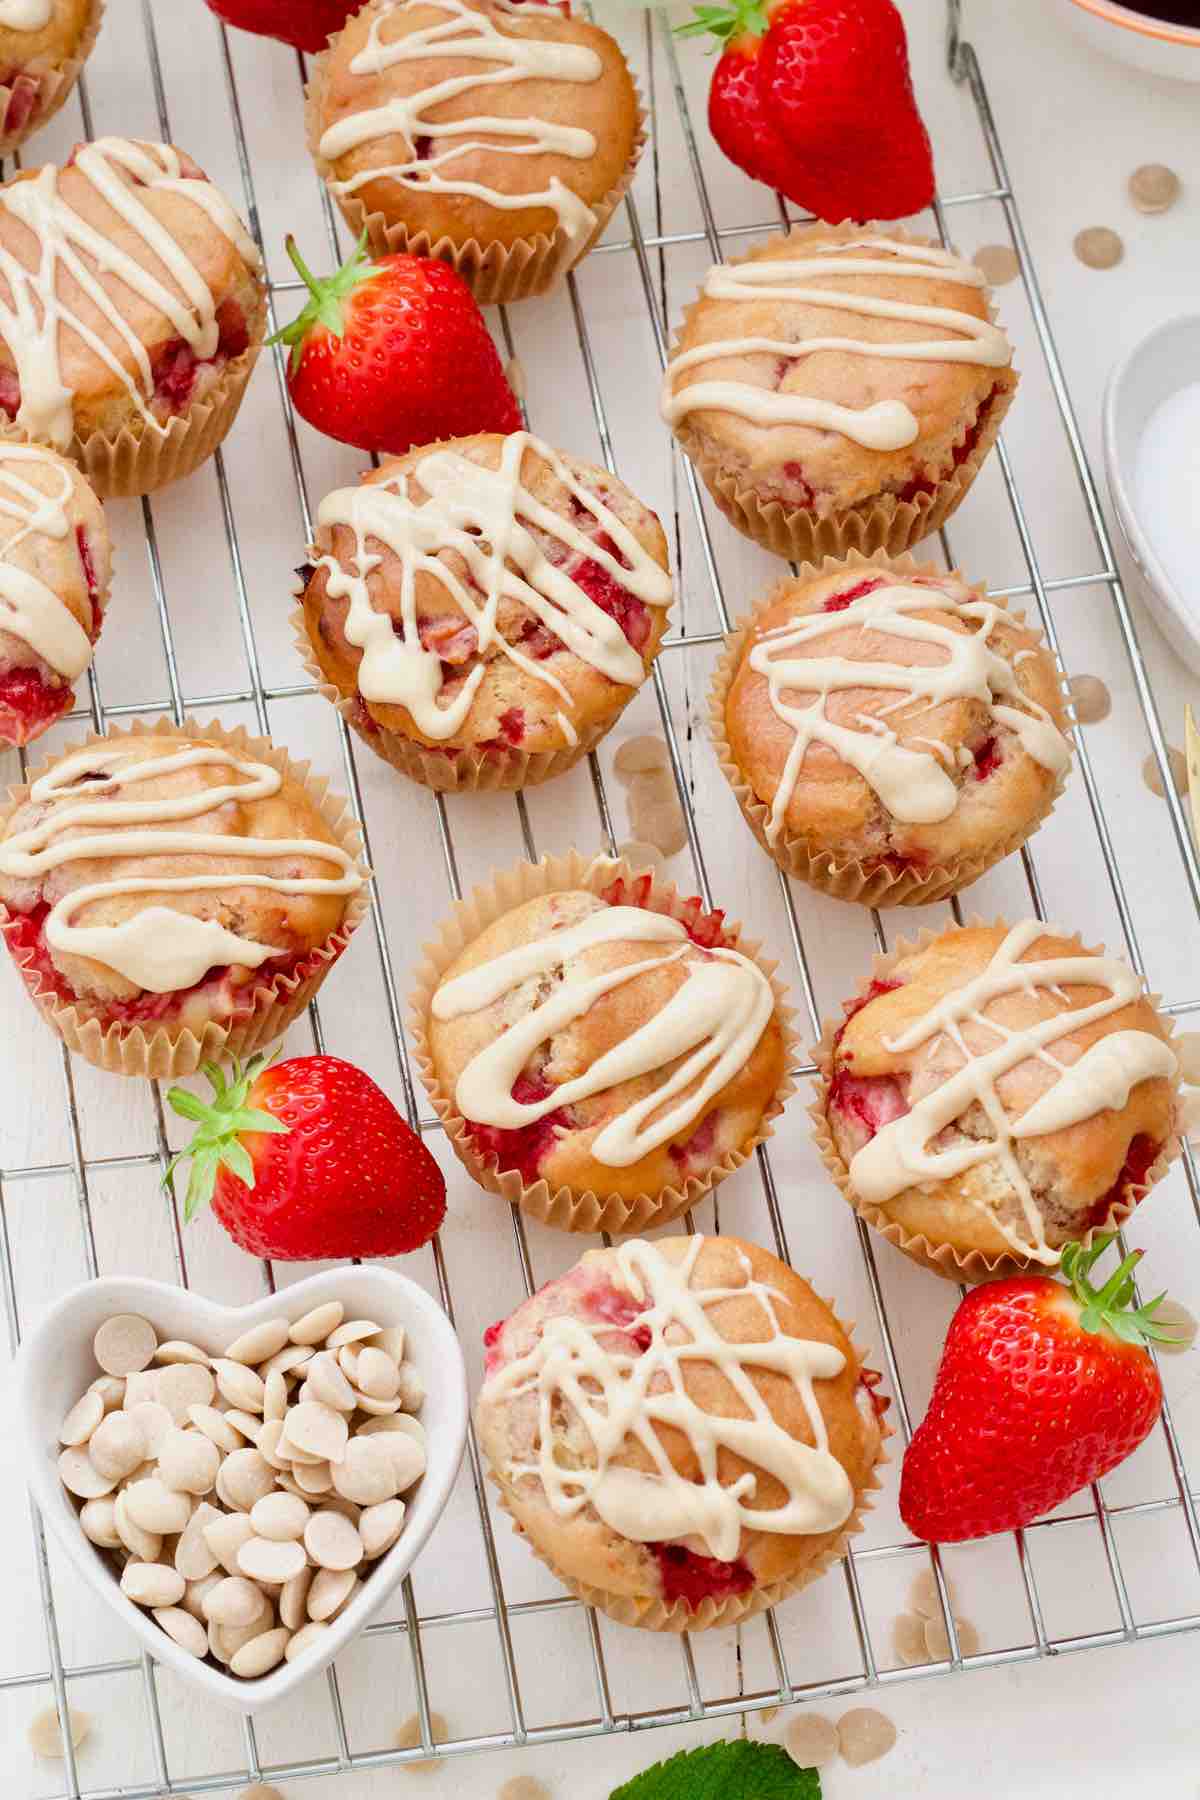 Vegan strawberry muffins with white chocolate drizzle on a cooling rack.